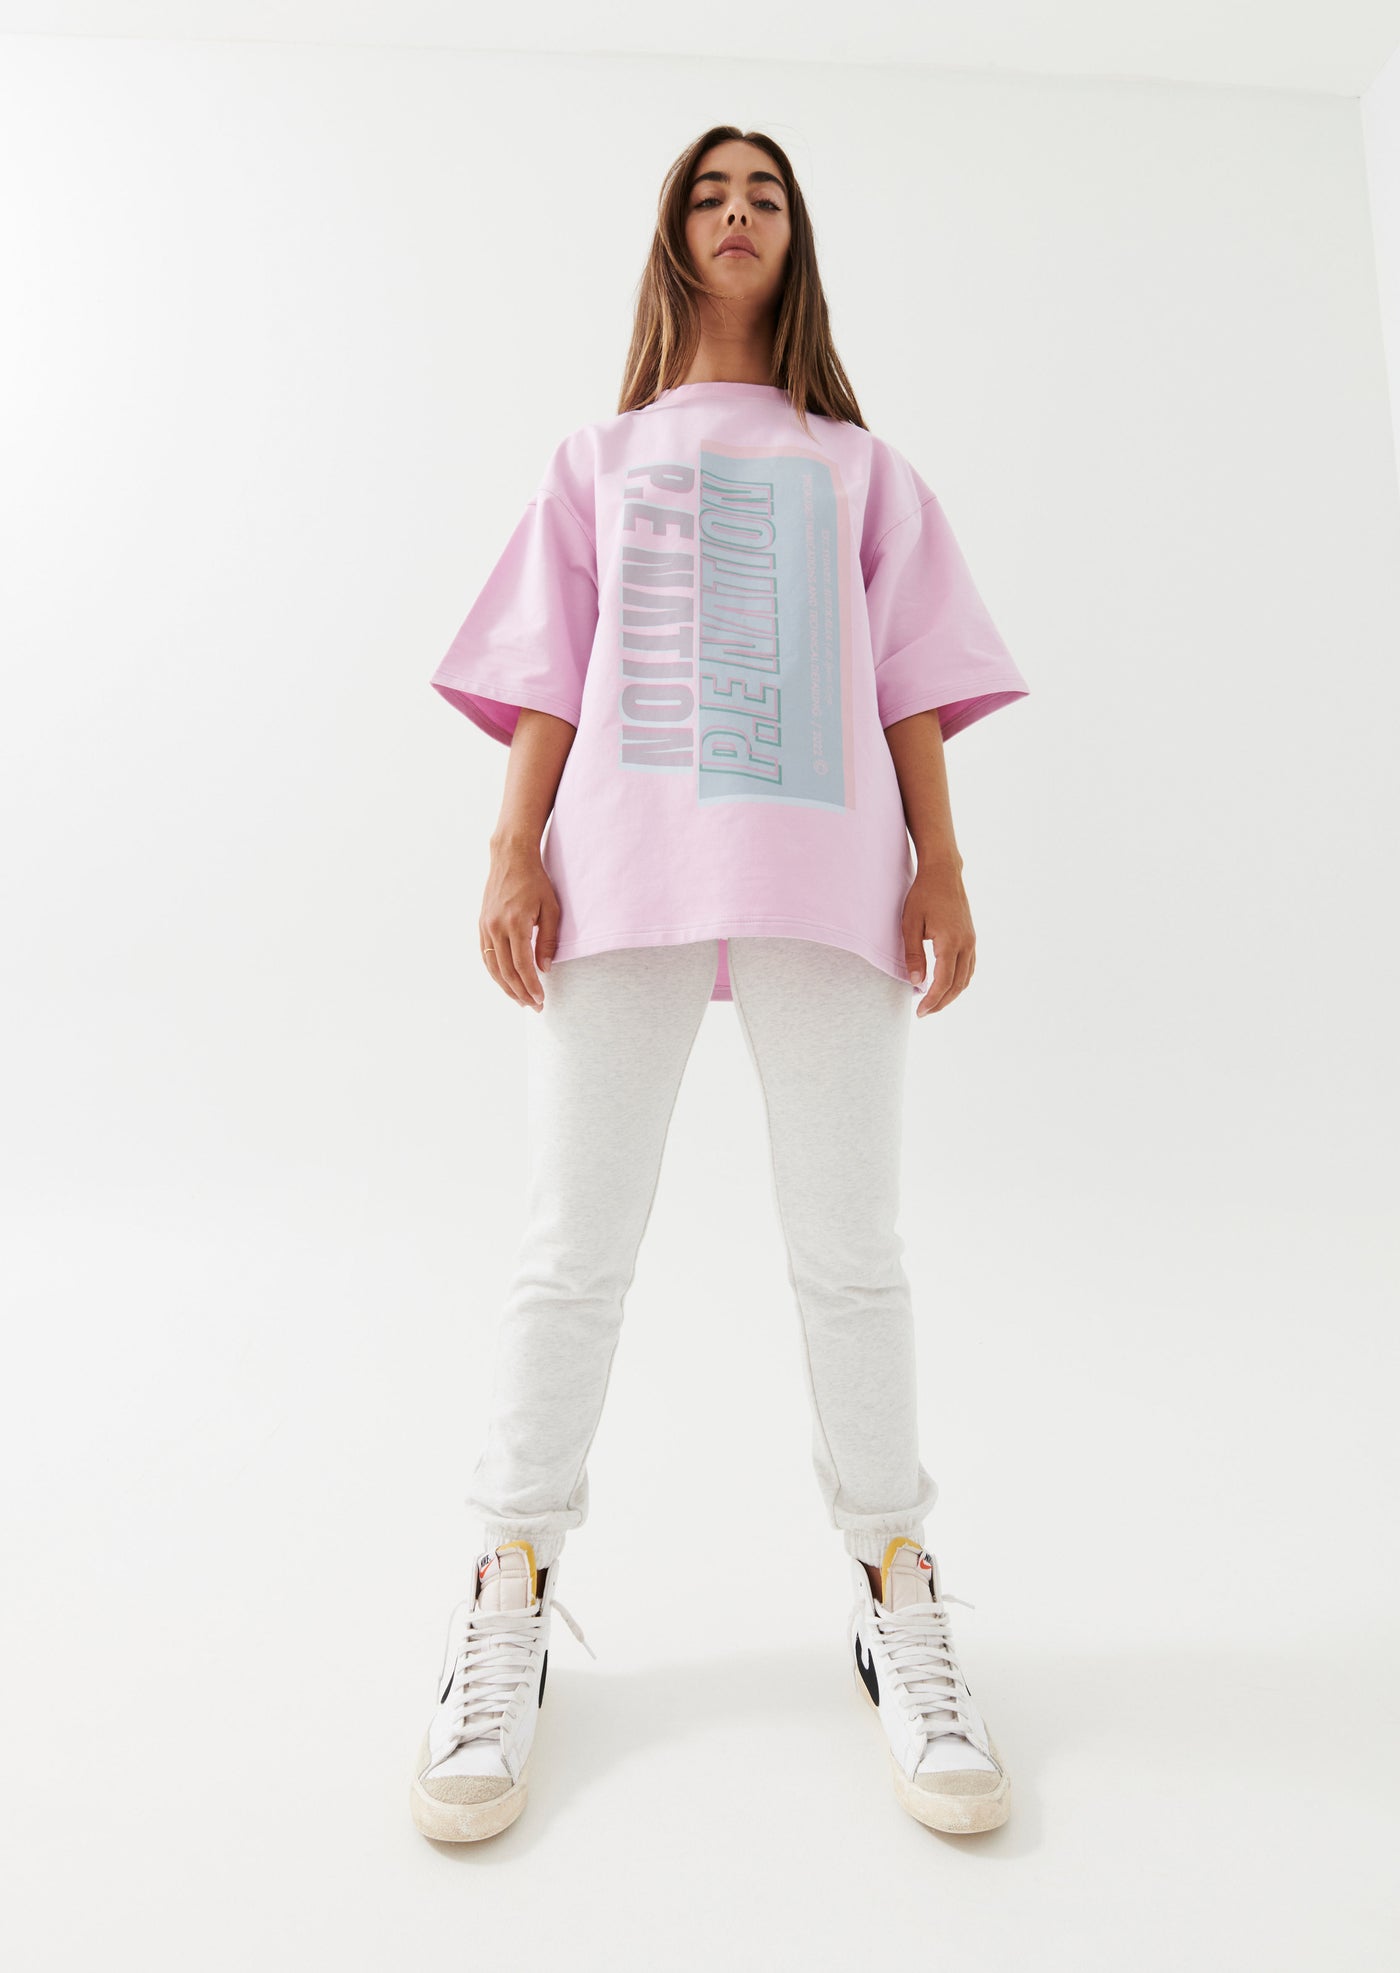 ALIGNMENT TEE IN PINK LAVENDER